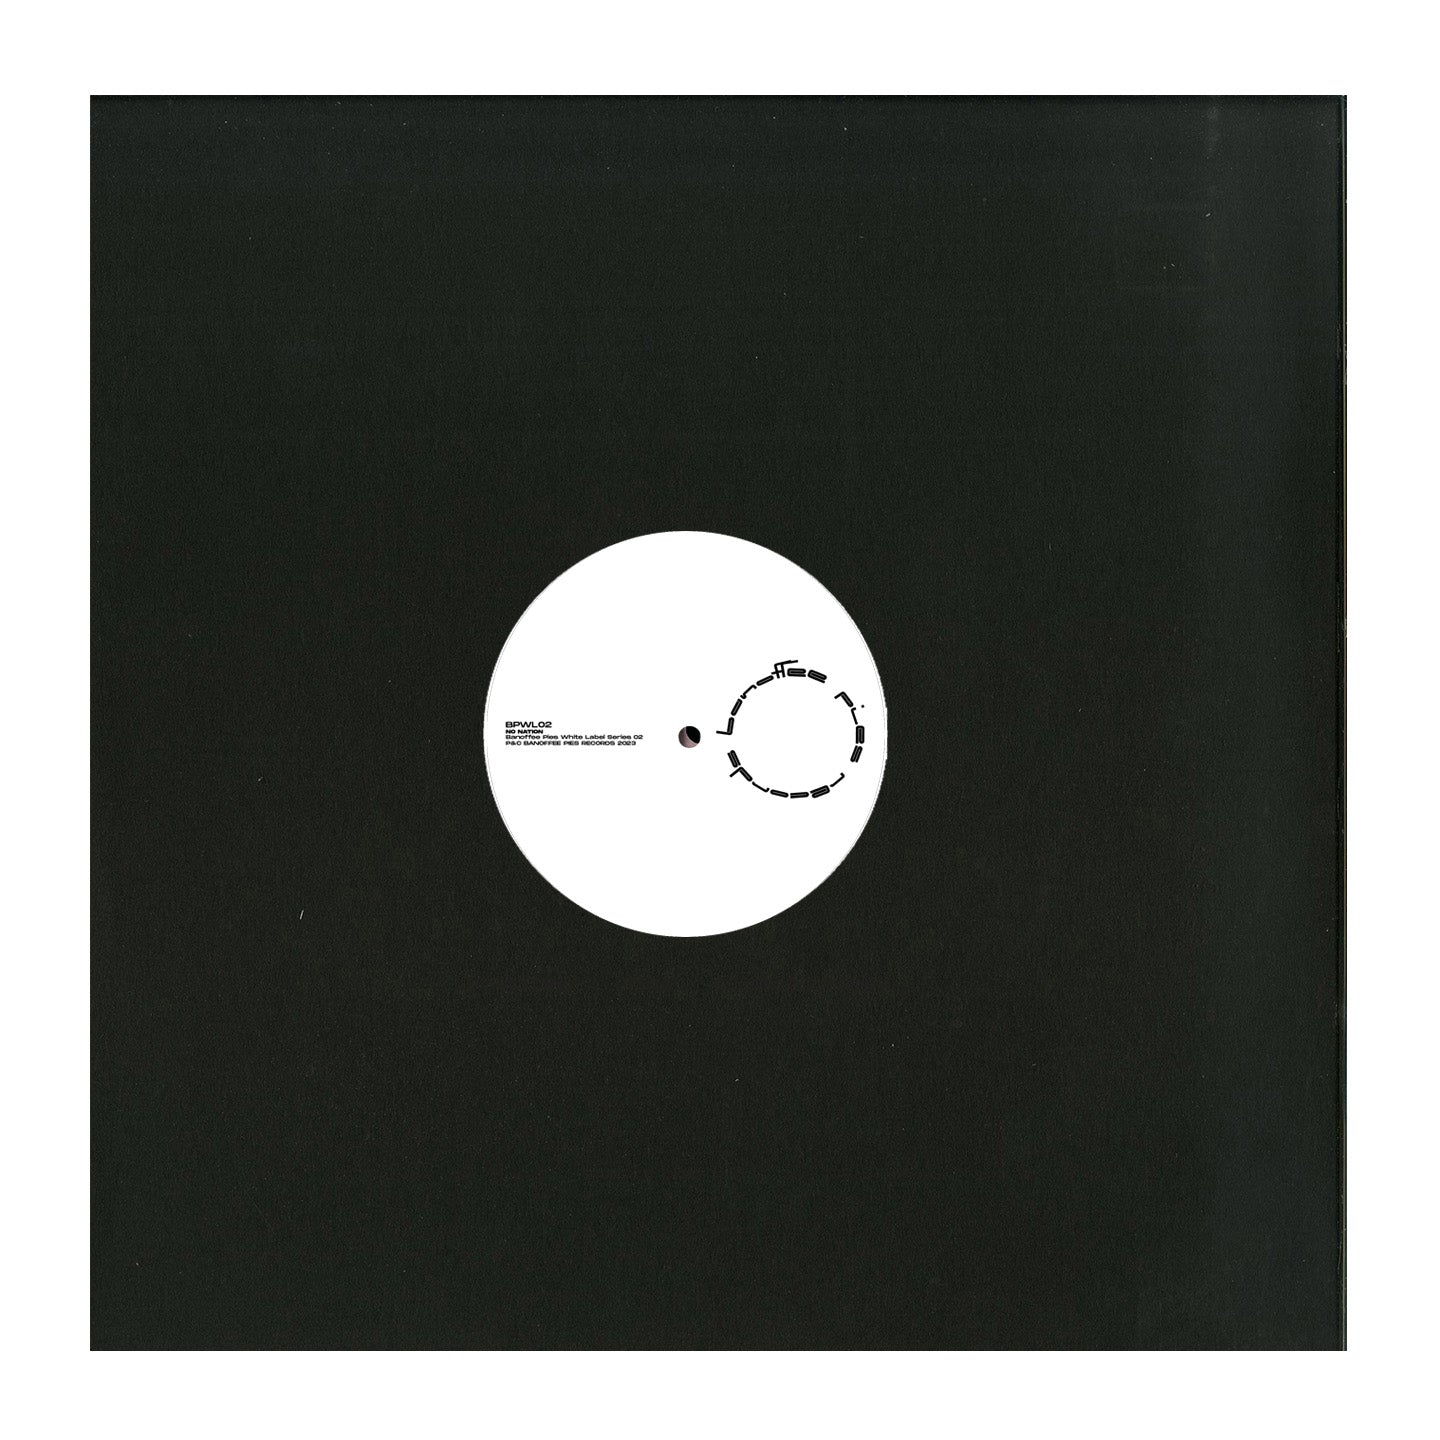 *PRE-ORDER* No Nation 'Banoffee Pies White Label Series 02' 12"